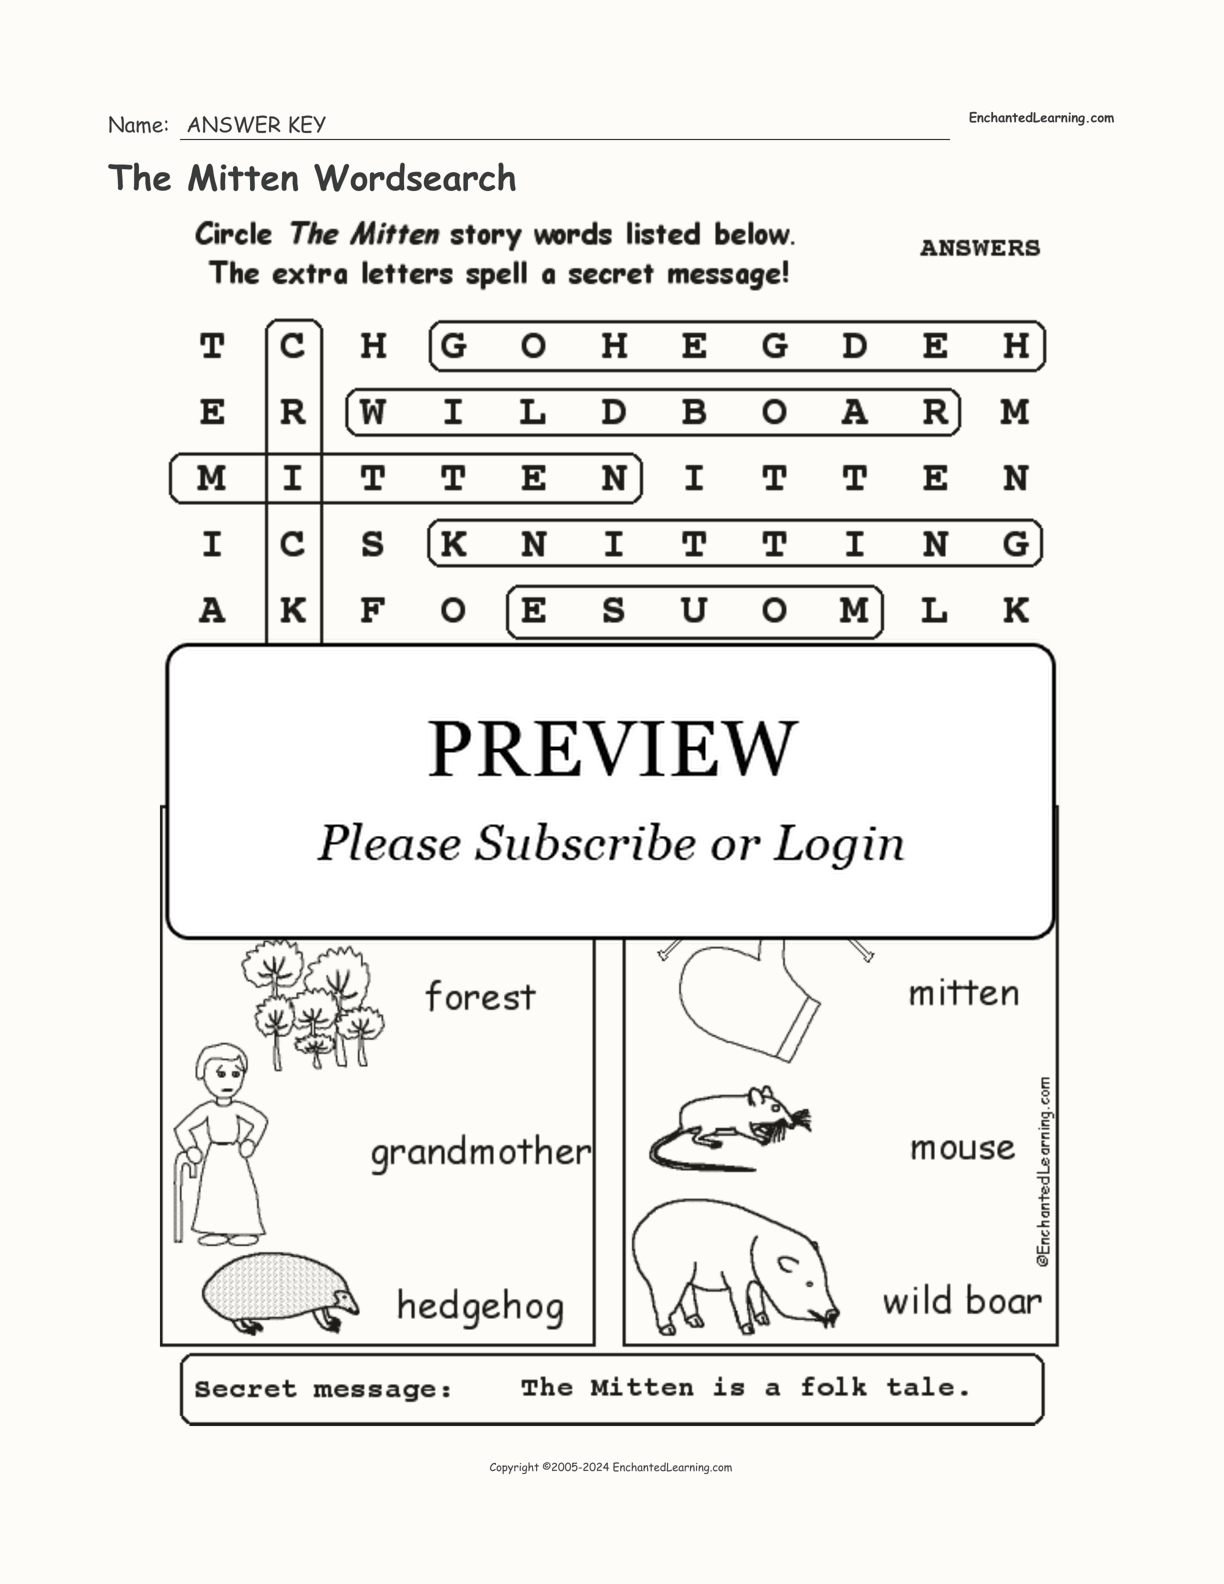 The Mitten Wordsearch interactive worksheet page 2